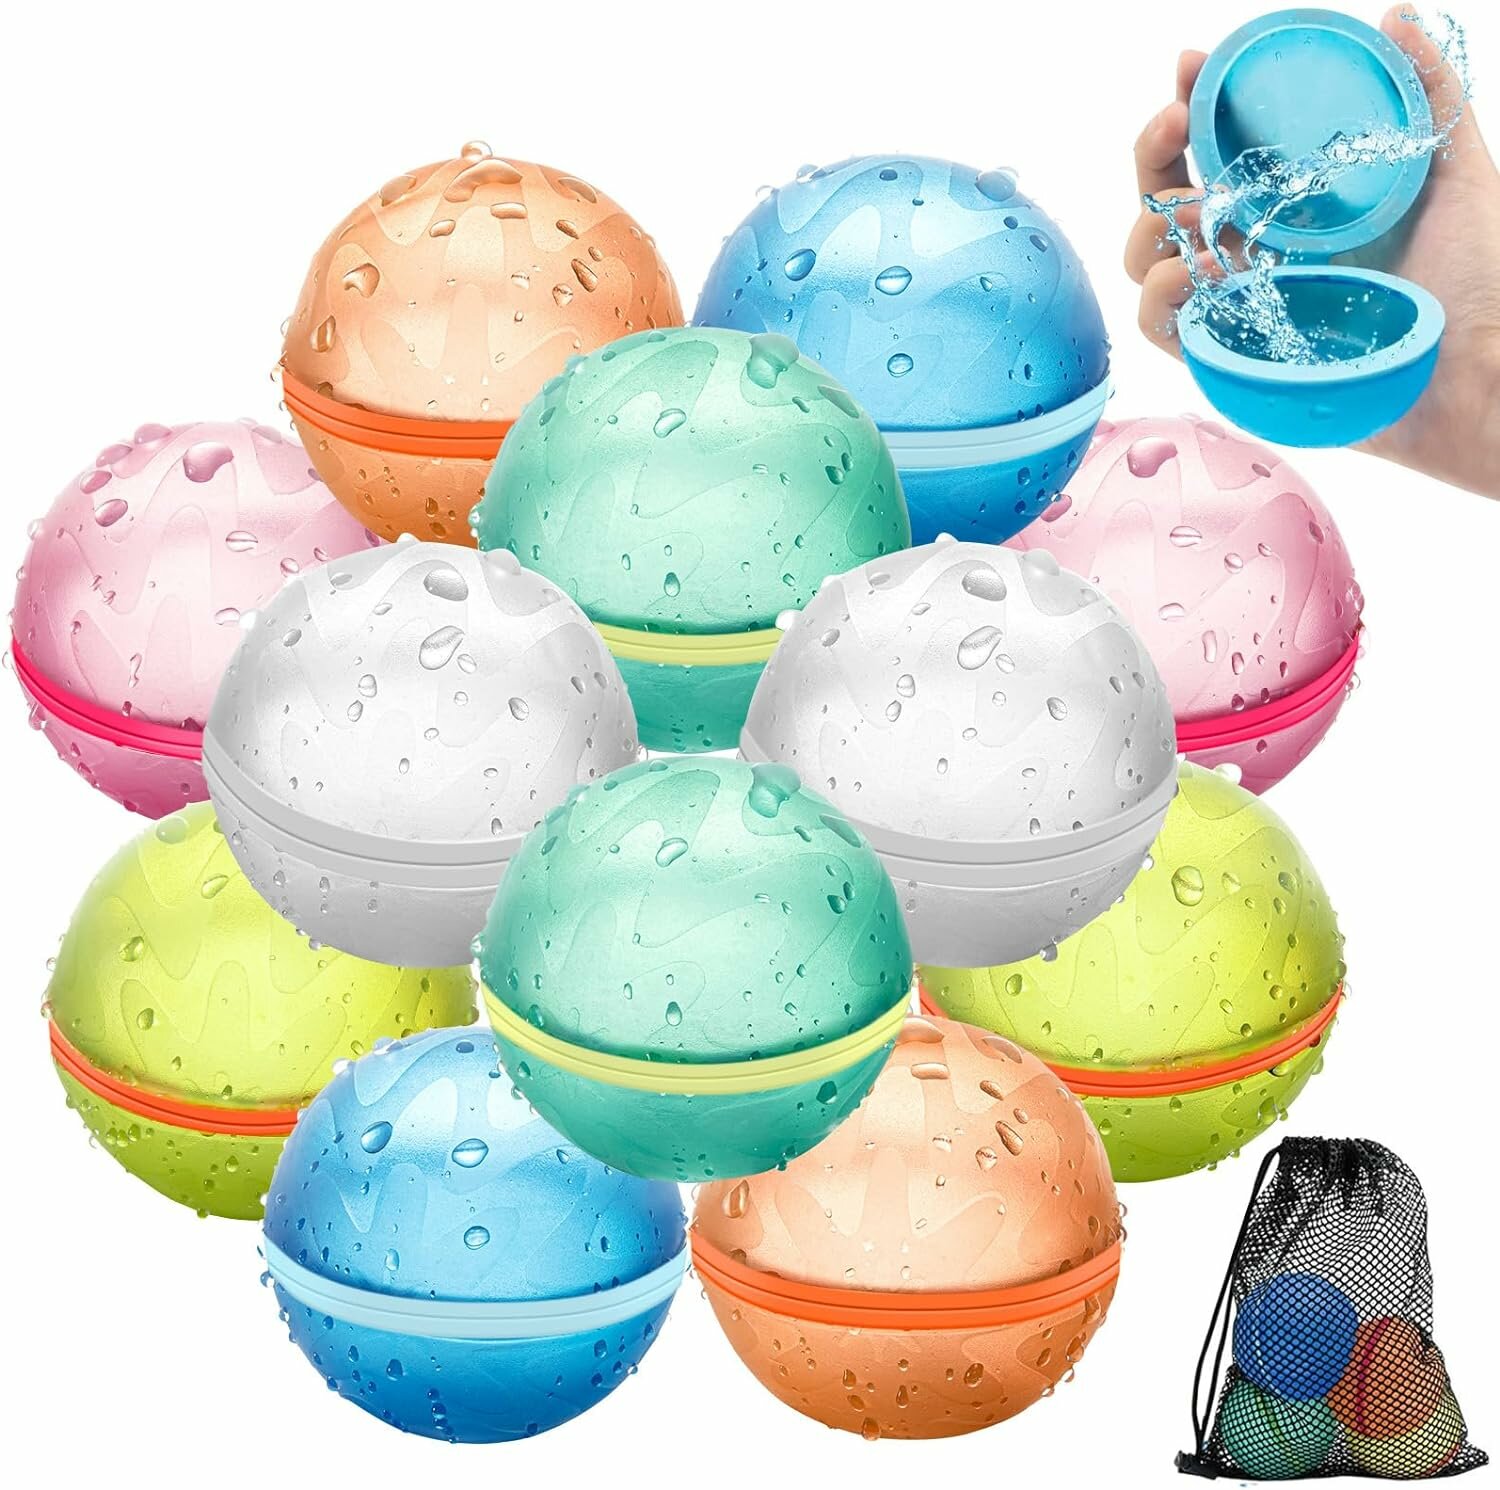 

Reusable Magnetic Refillable Water Balls Summer Outdoor Water Toy for Kids and Adults Self Sealing Quick Filling Water B